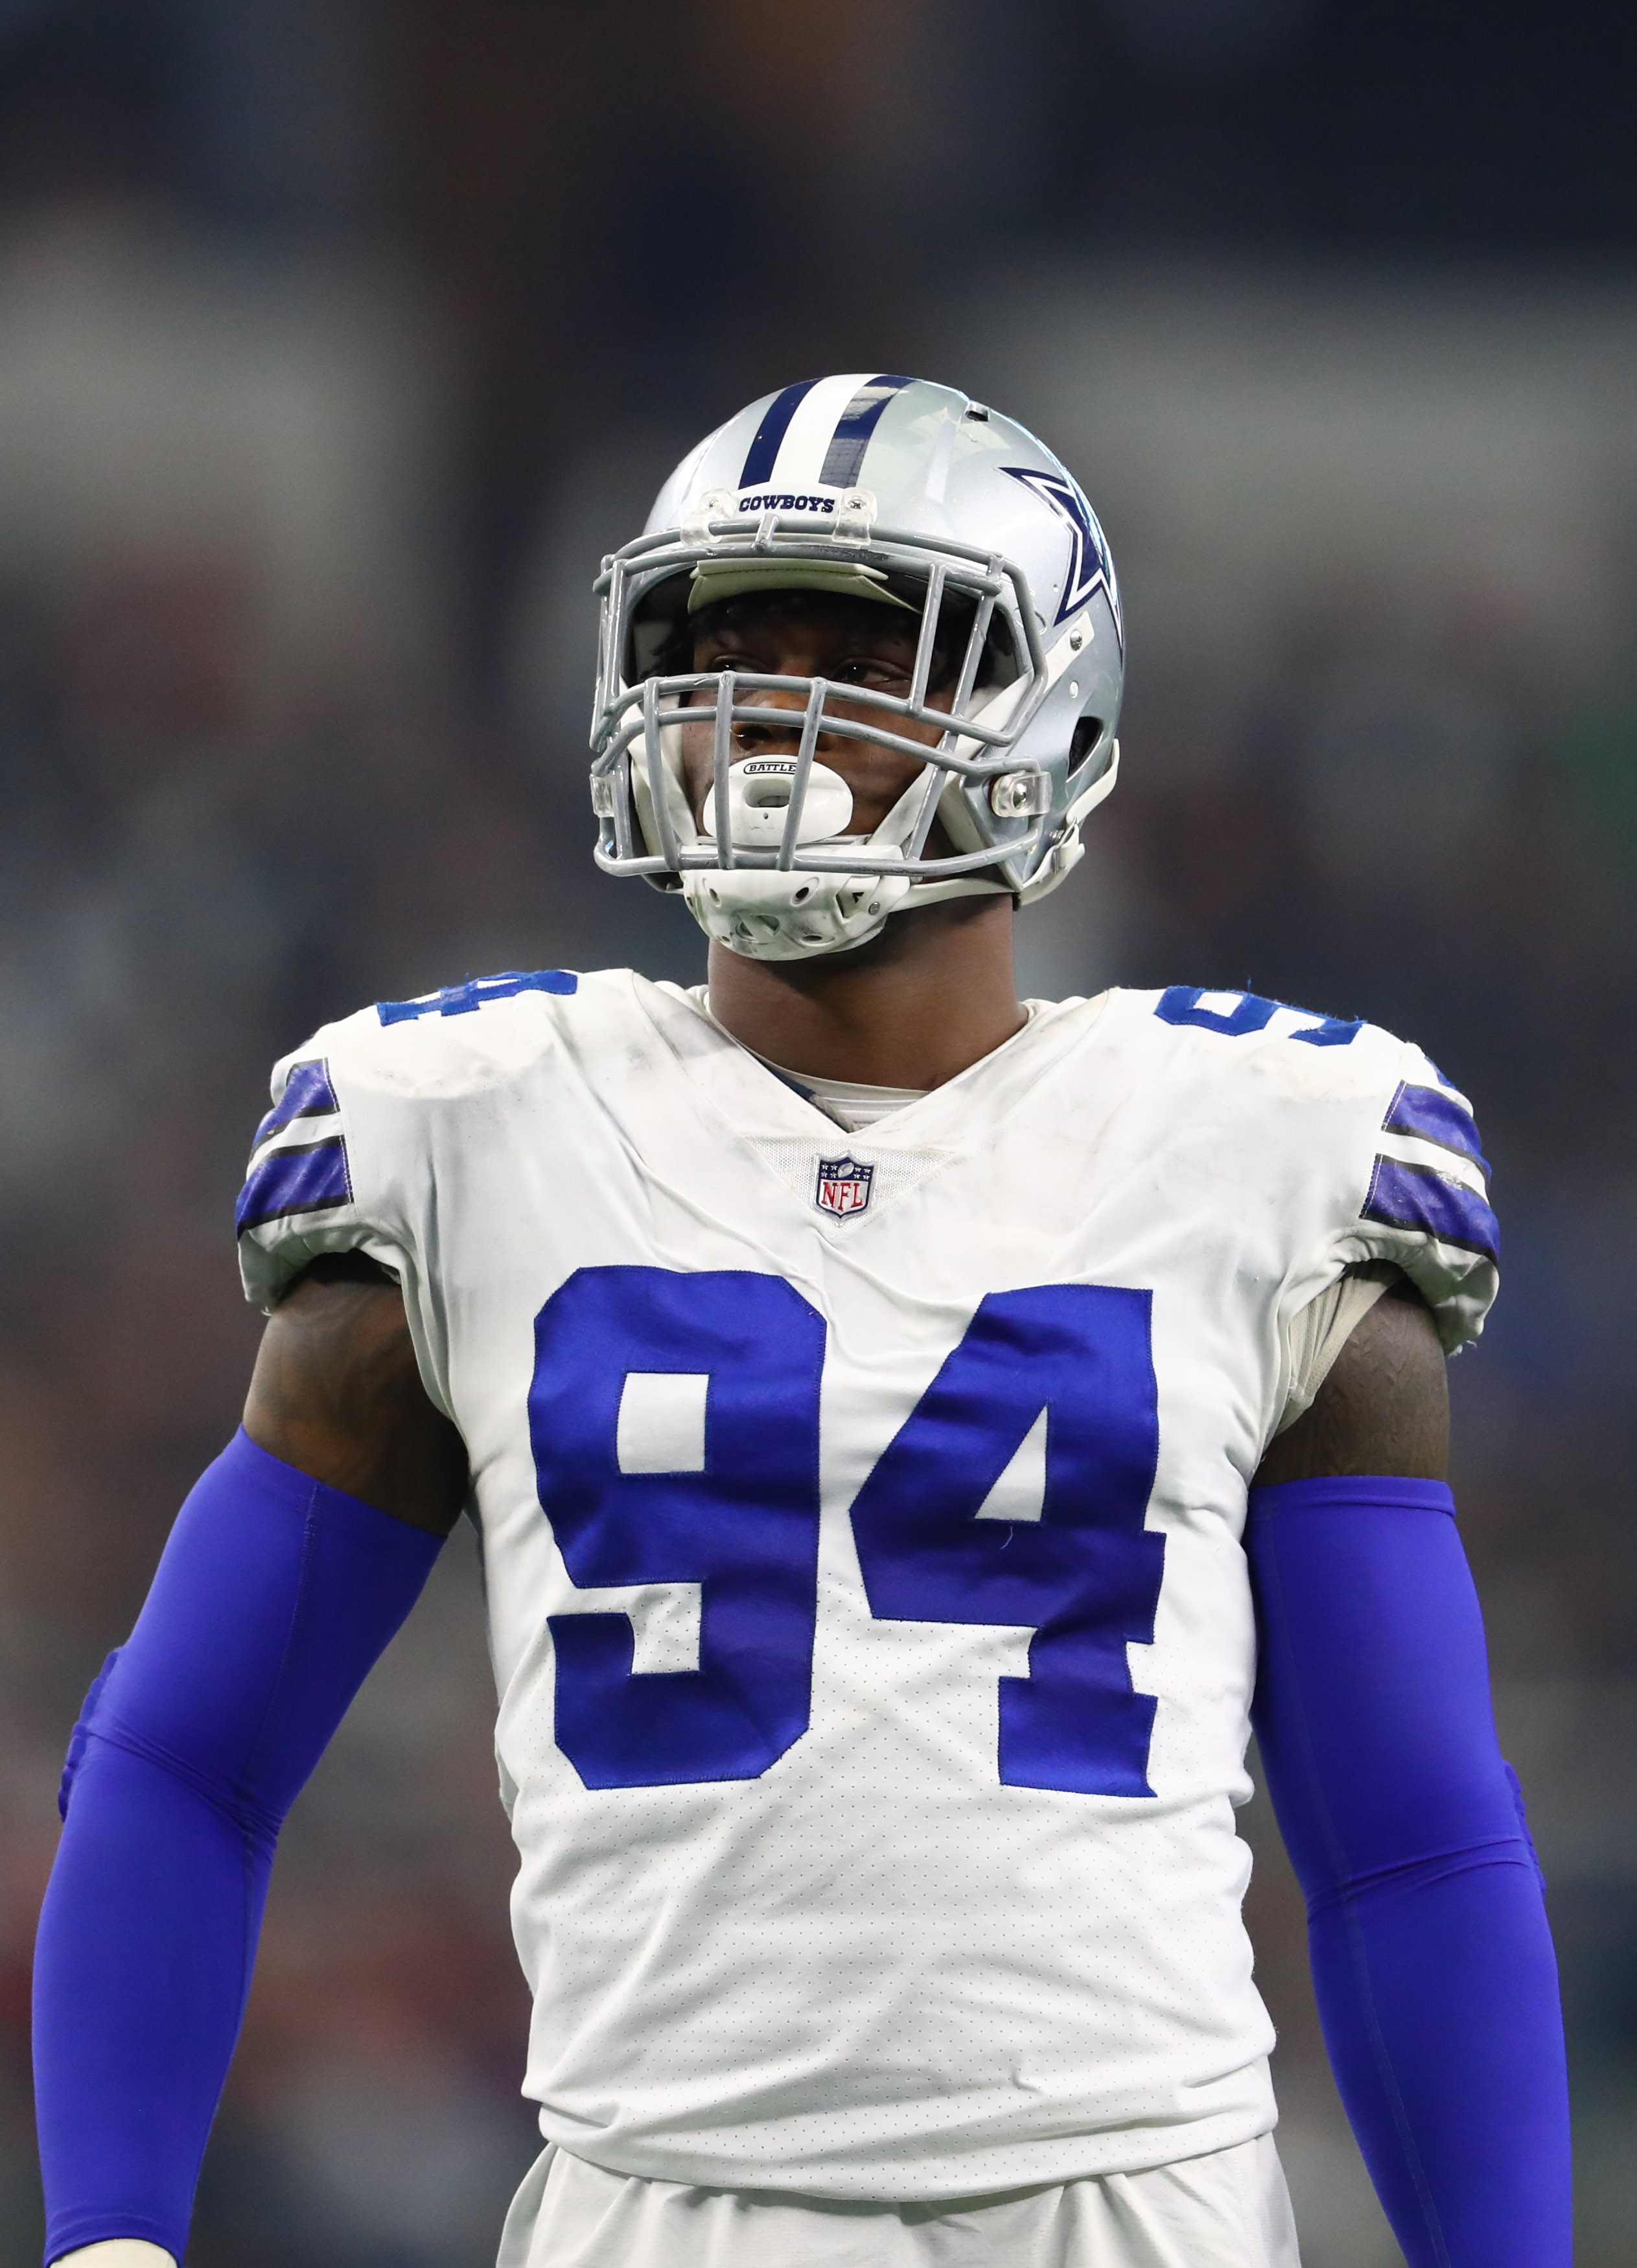 Randy Gregory's Contract was extended